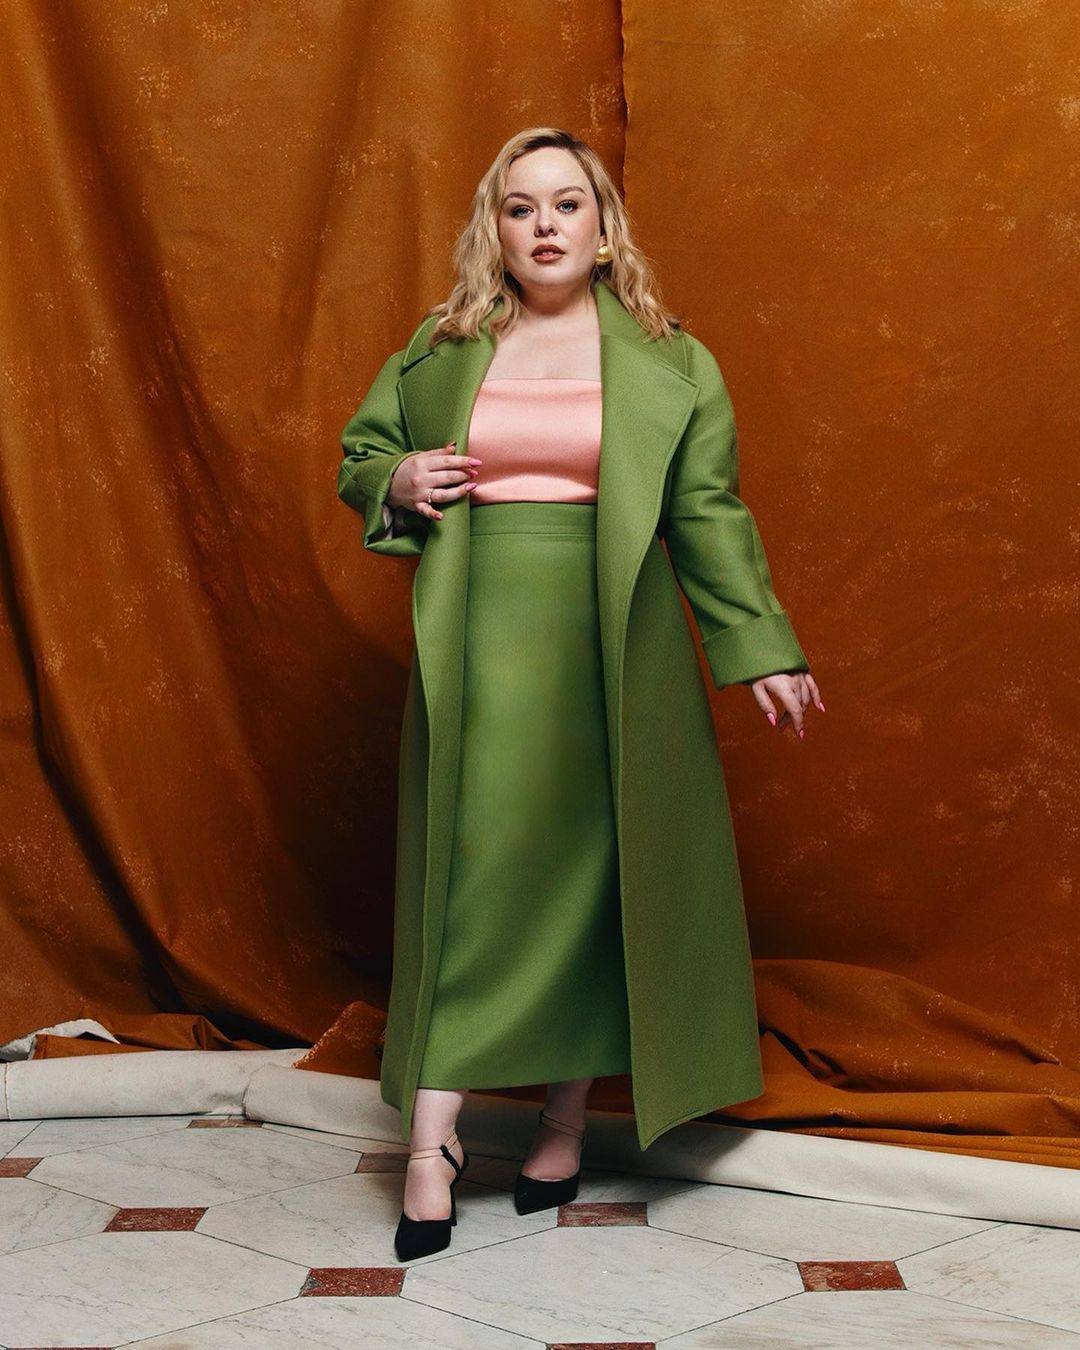 Nicola Coughlan at the Emilia Wickstead show at London Fashion Week in September 2023. Photo: @nicolacoughlan/Instagram